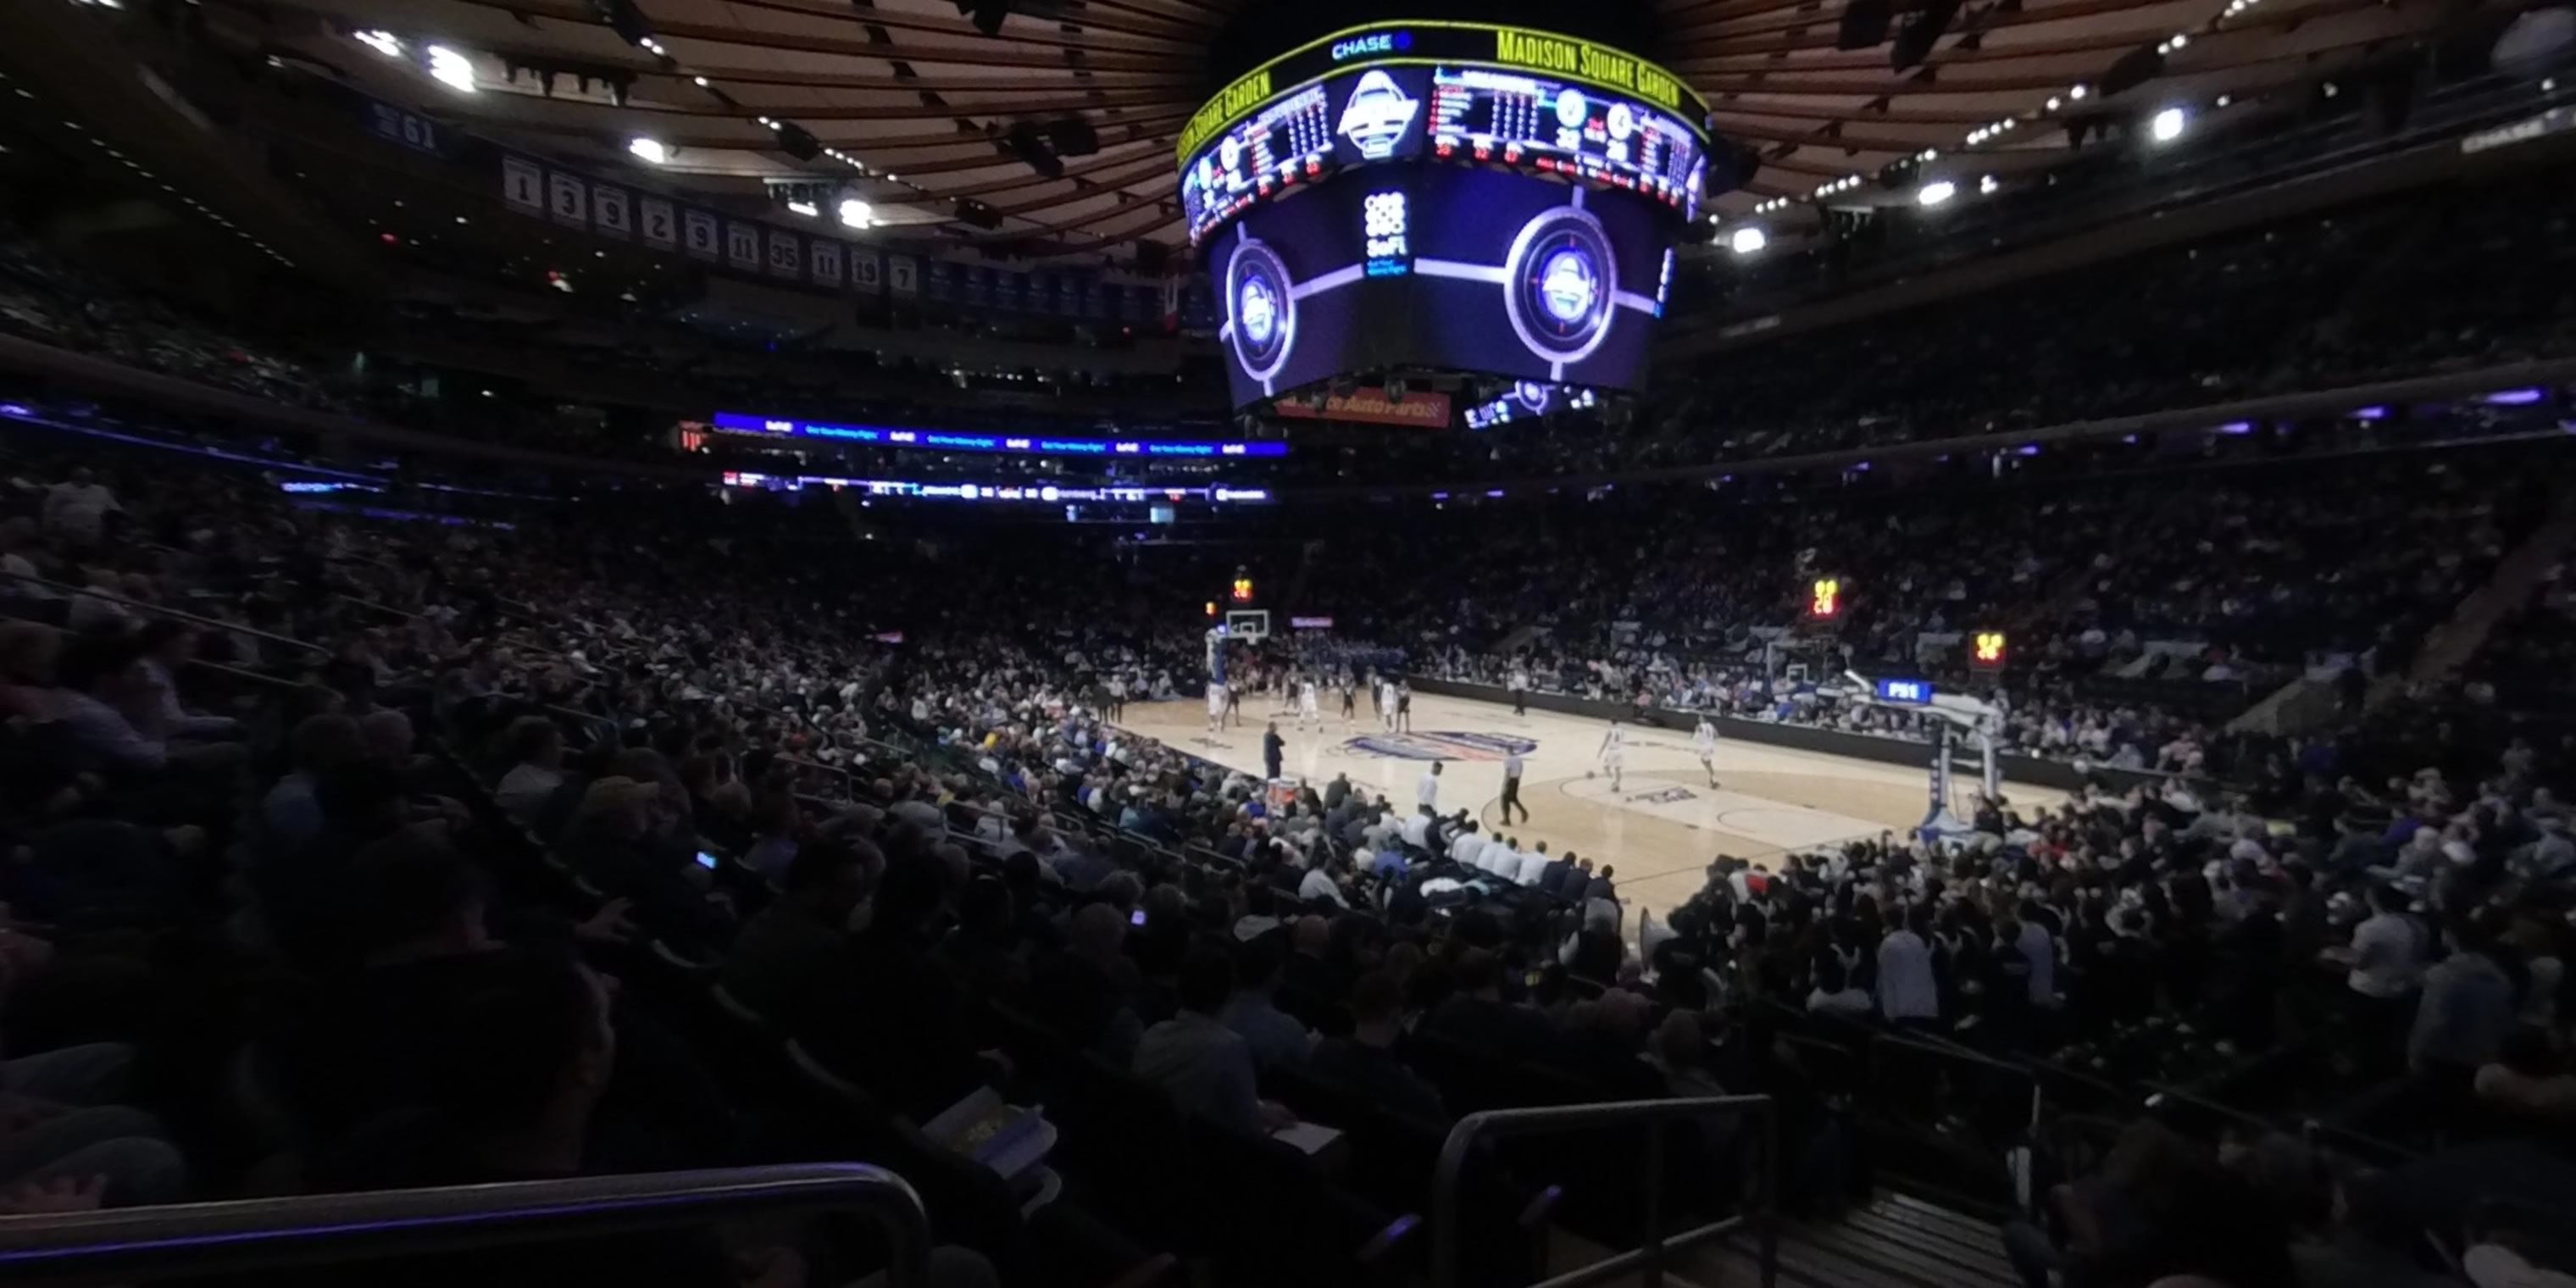 section 109 panoramic seat view  for basketball - madison square garden